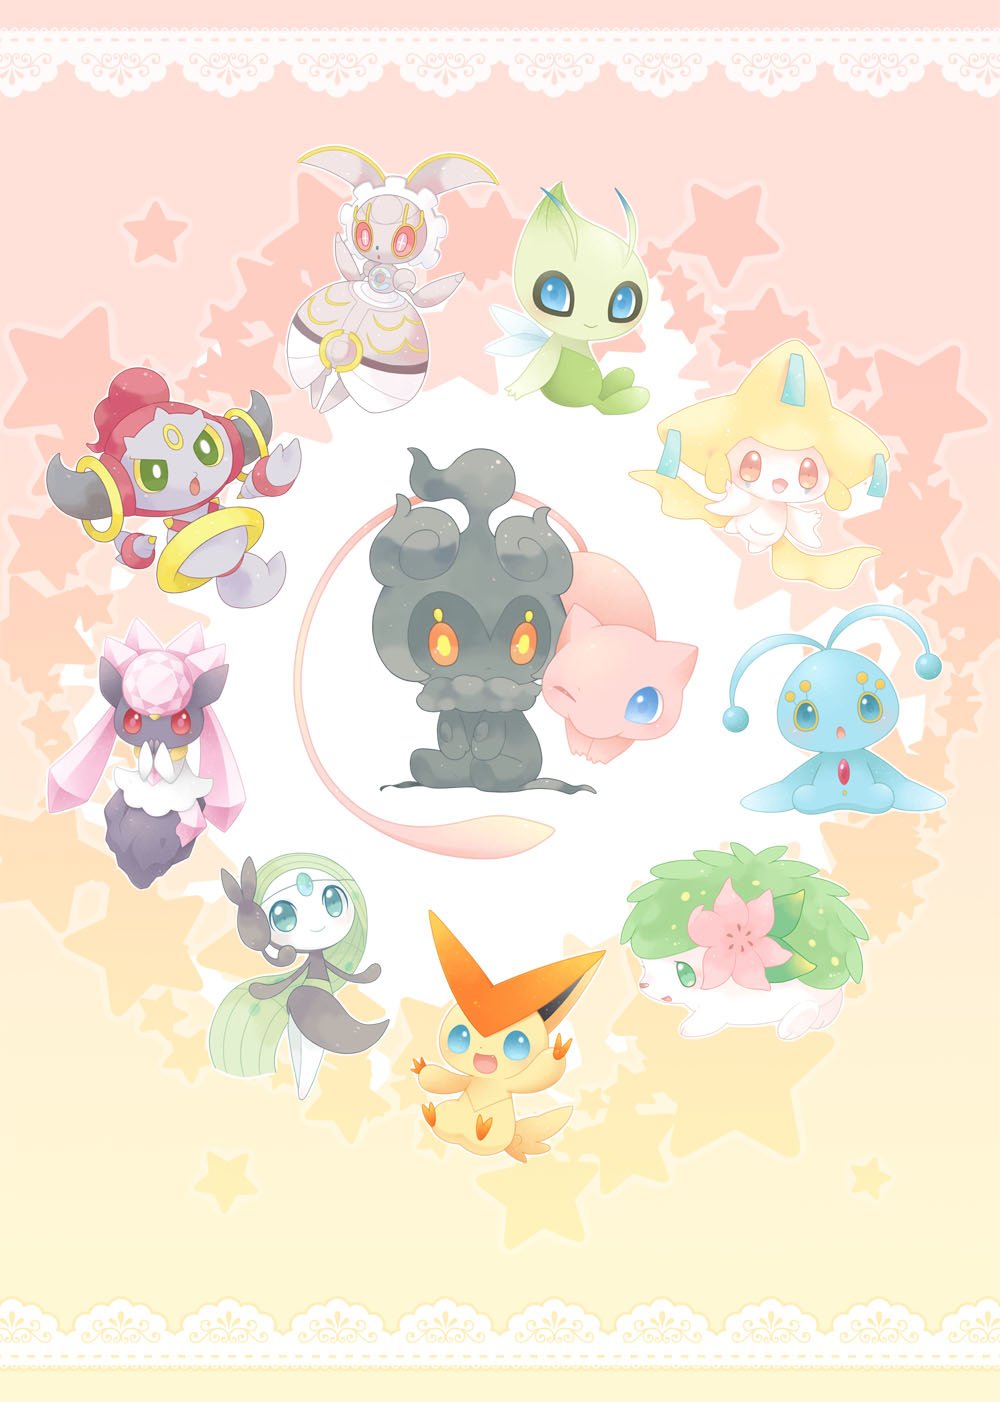 :d :o blue_eyes celebi closed_mouth commentary_request diancie floating gen_1_pokemon gen_2_pokemon gen_3_pokemon gen_4_pokemon gen_5_pokemon gen_6_pokemon gen_7_pokemon green_eyes highres hoopa hoopa_(confined) jirachi looking_at_another looking_at_viewer magearna magearna_(normal) manaphy marshadow marshadow_(gloom) meloetta meloetta_(aria) mew mitiruni mythical_pokemon no_humans one_eye_closed open_mouth pokemon pokemon_(creature) red_eyes shaymin shaymin_(land) sitting smile standing starry_background victini